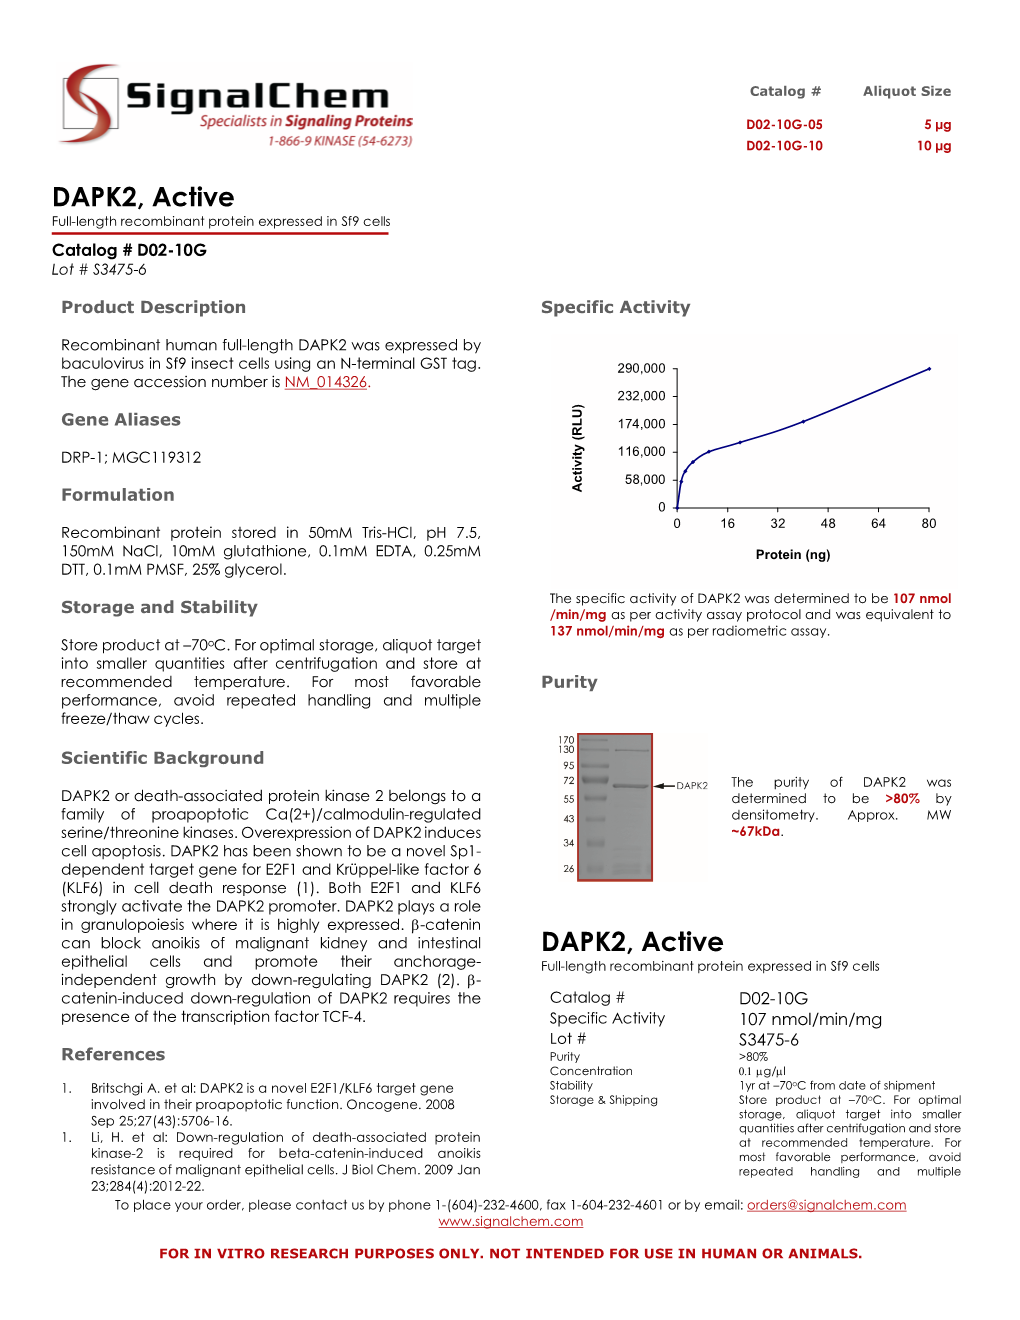 DAPK2, Active Full-Length Recombinant Protein Expressed in Sf9 Cells